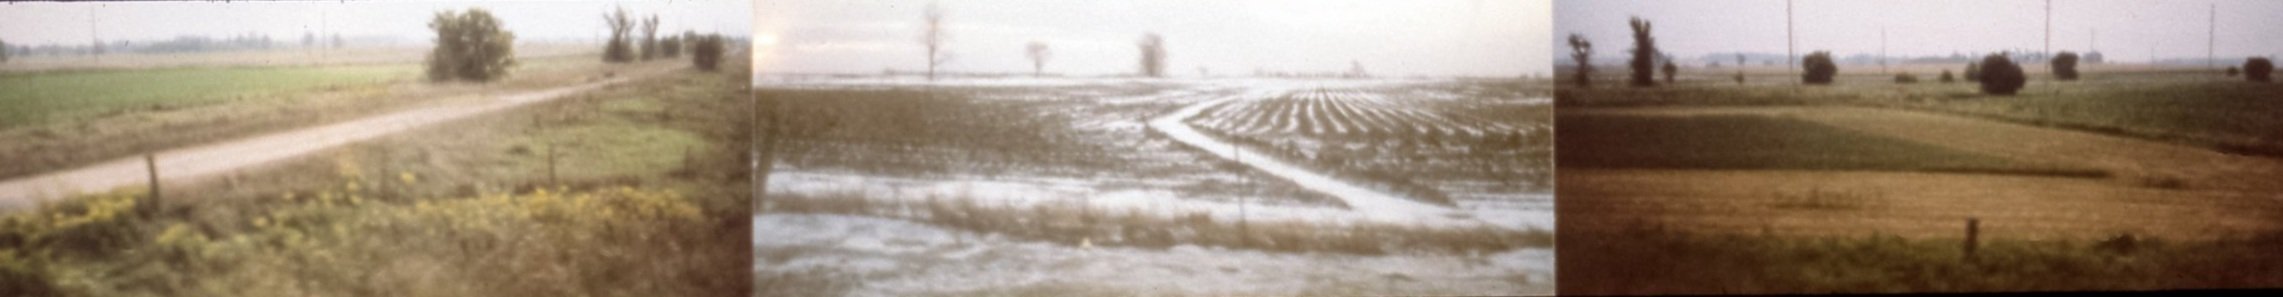   Marginal Lands   Marginal Lands is a photographic archive documenting my daily commute between Caledon and the Brampton GO train station, during the years 1999-2001. I used a low-tech panoramic camera and shot from a moving vehicle as I observed th